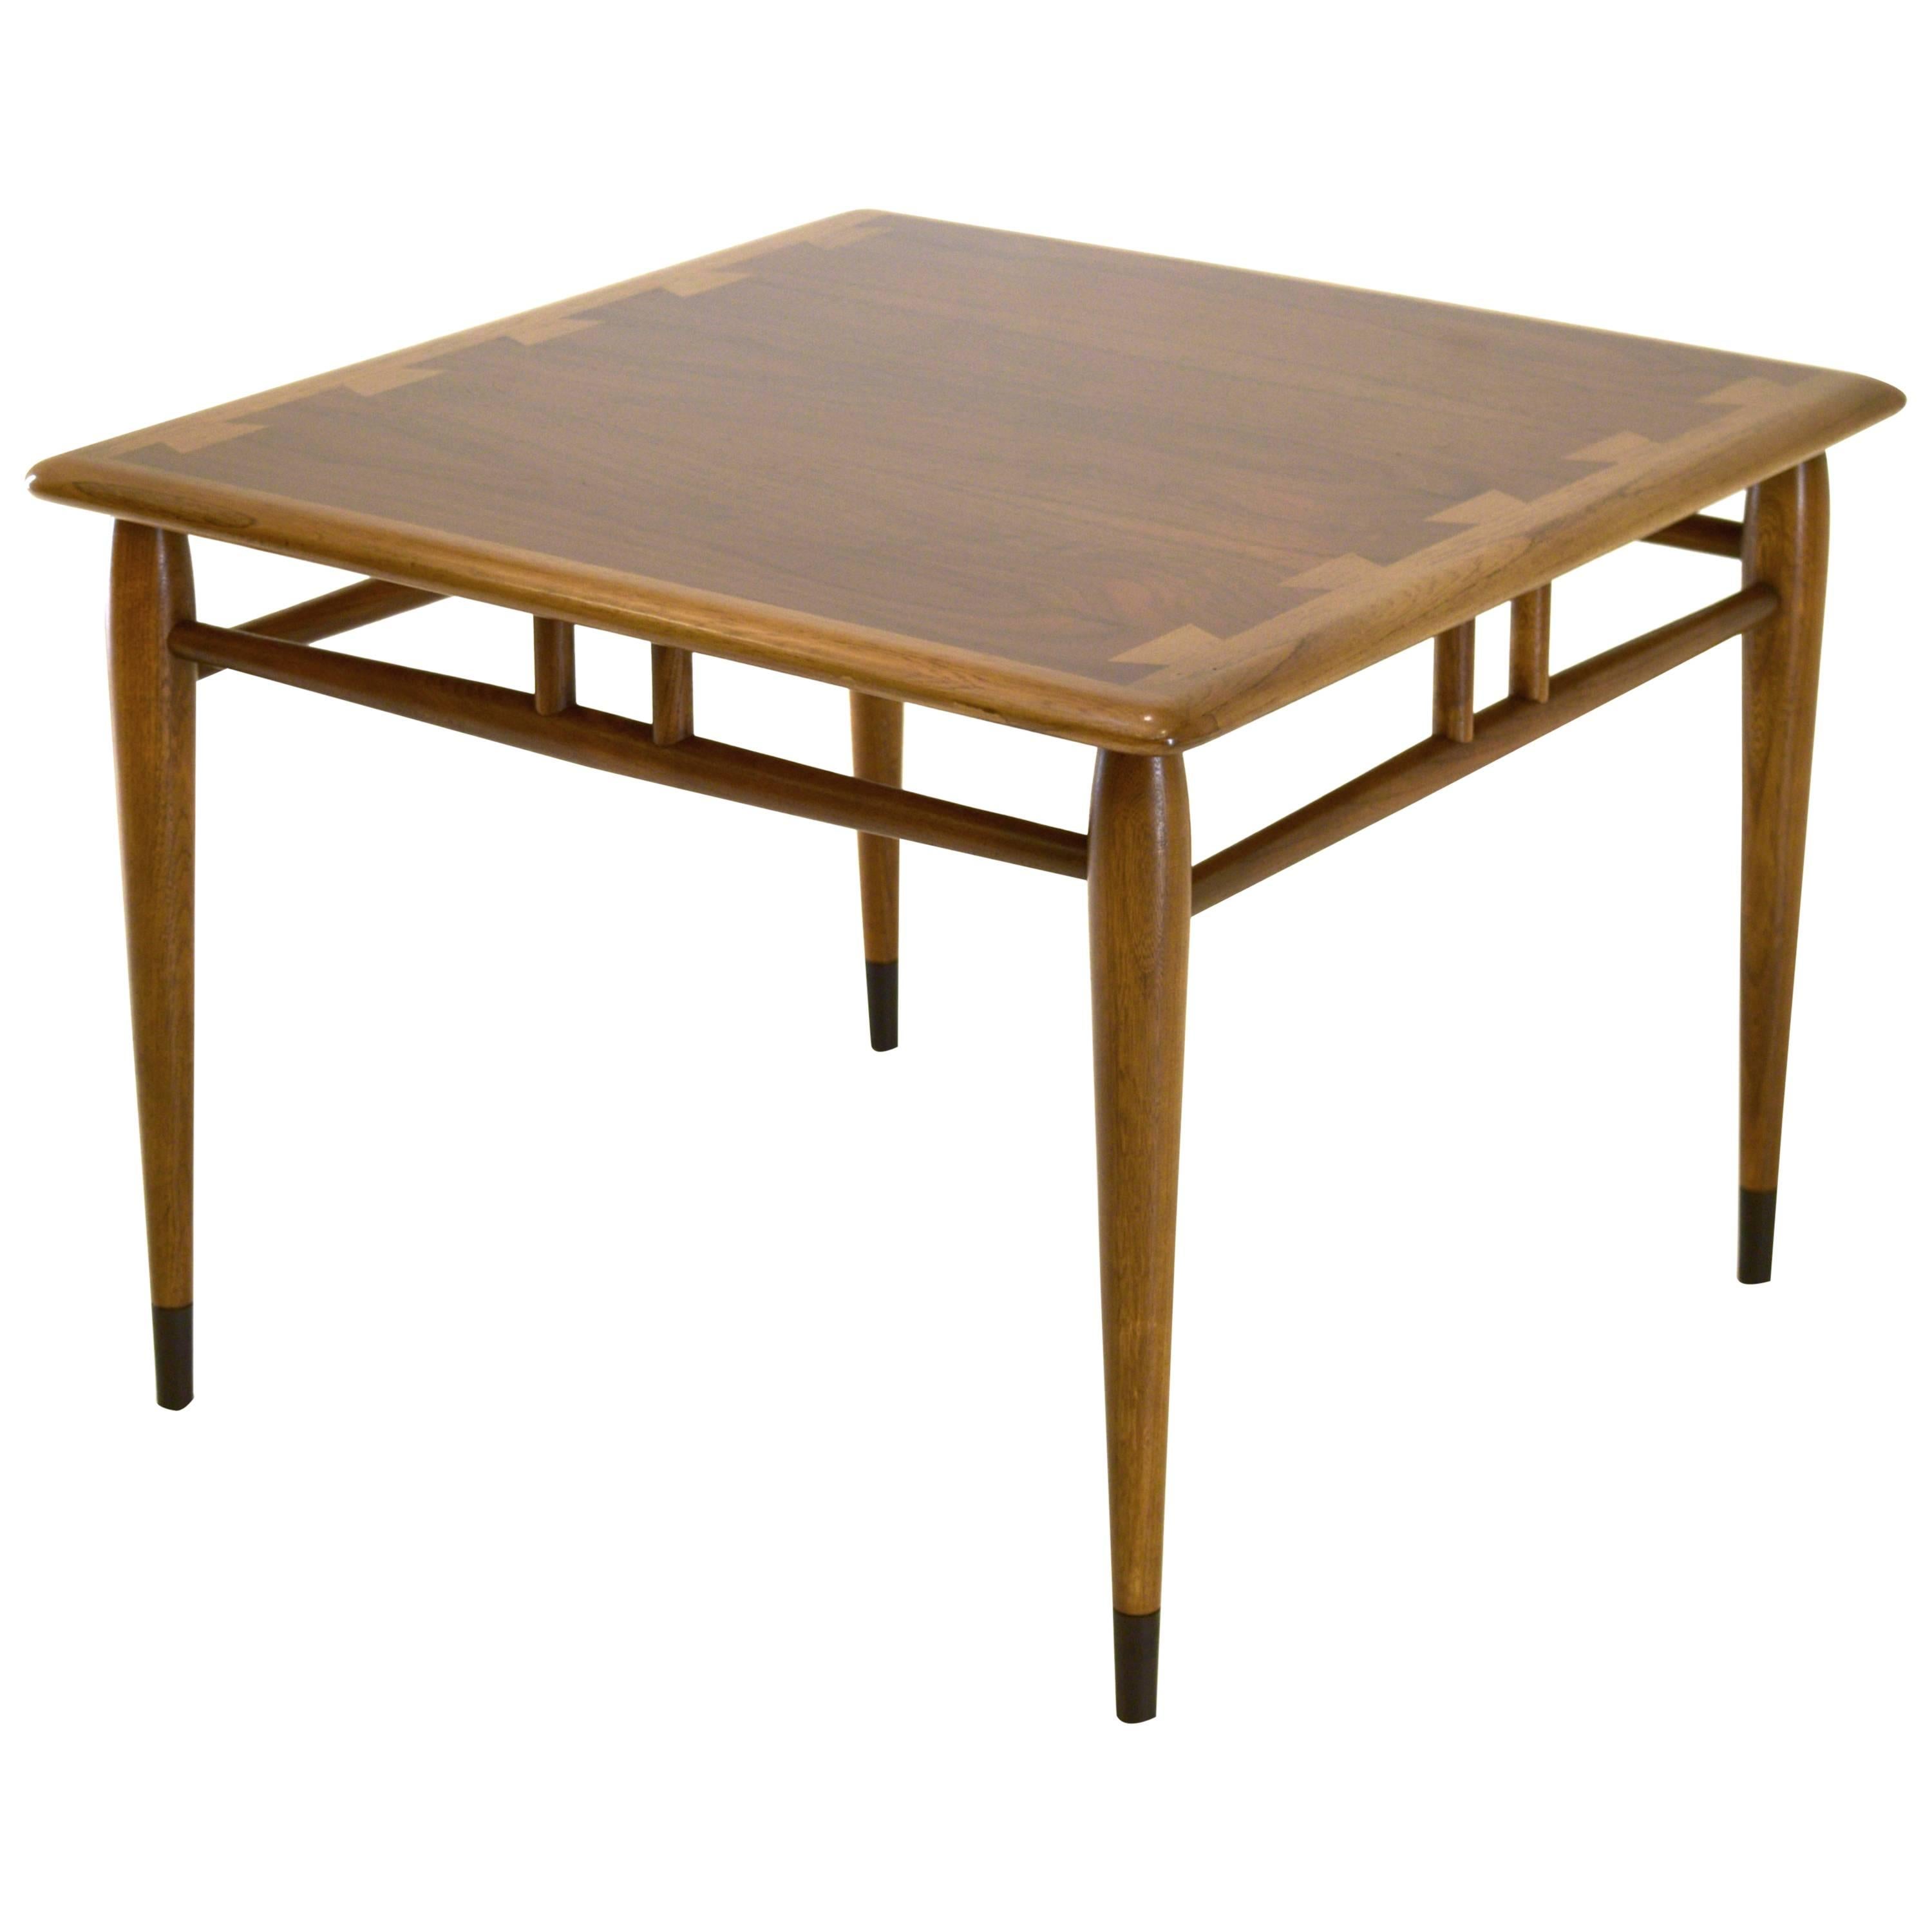 Large Center or Occasional Table by Lane Acclaim with Dovetail Styling